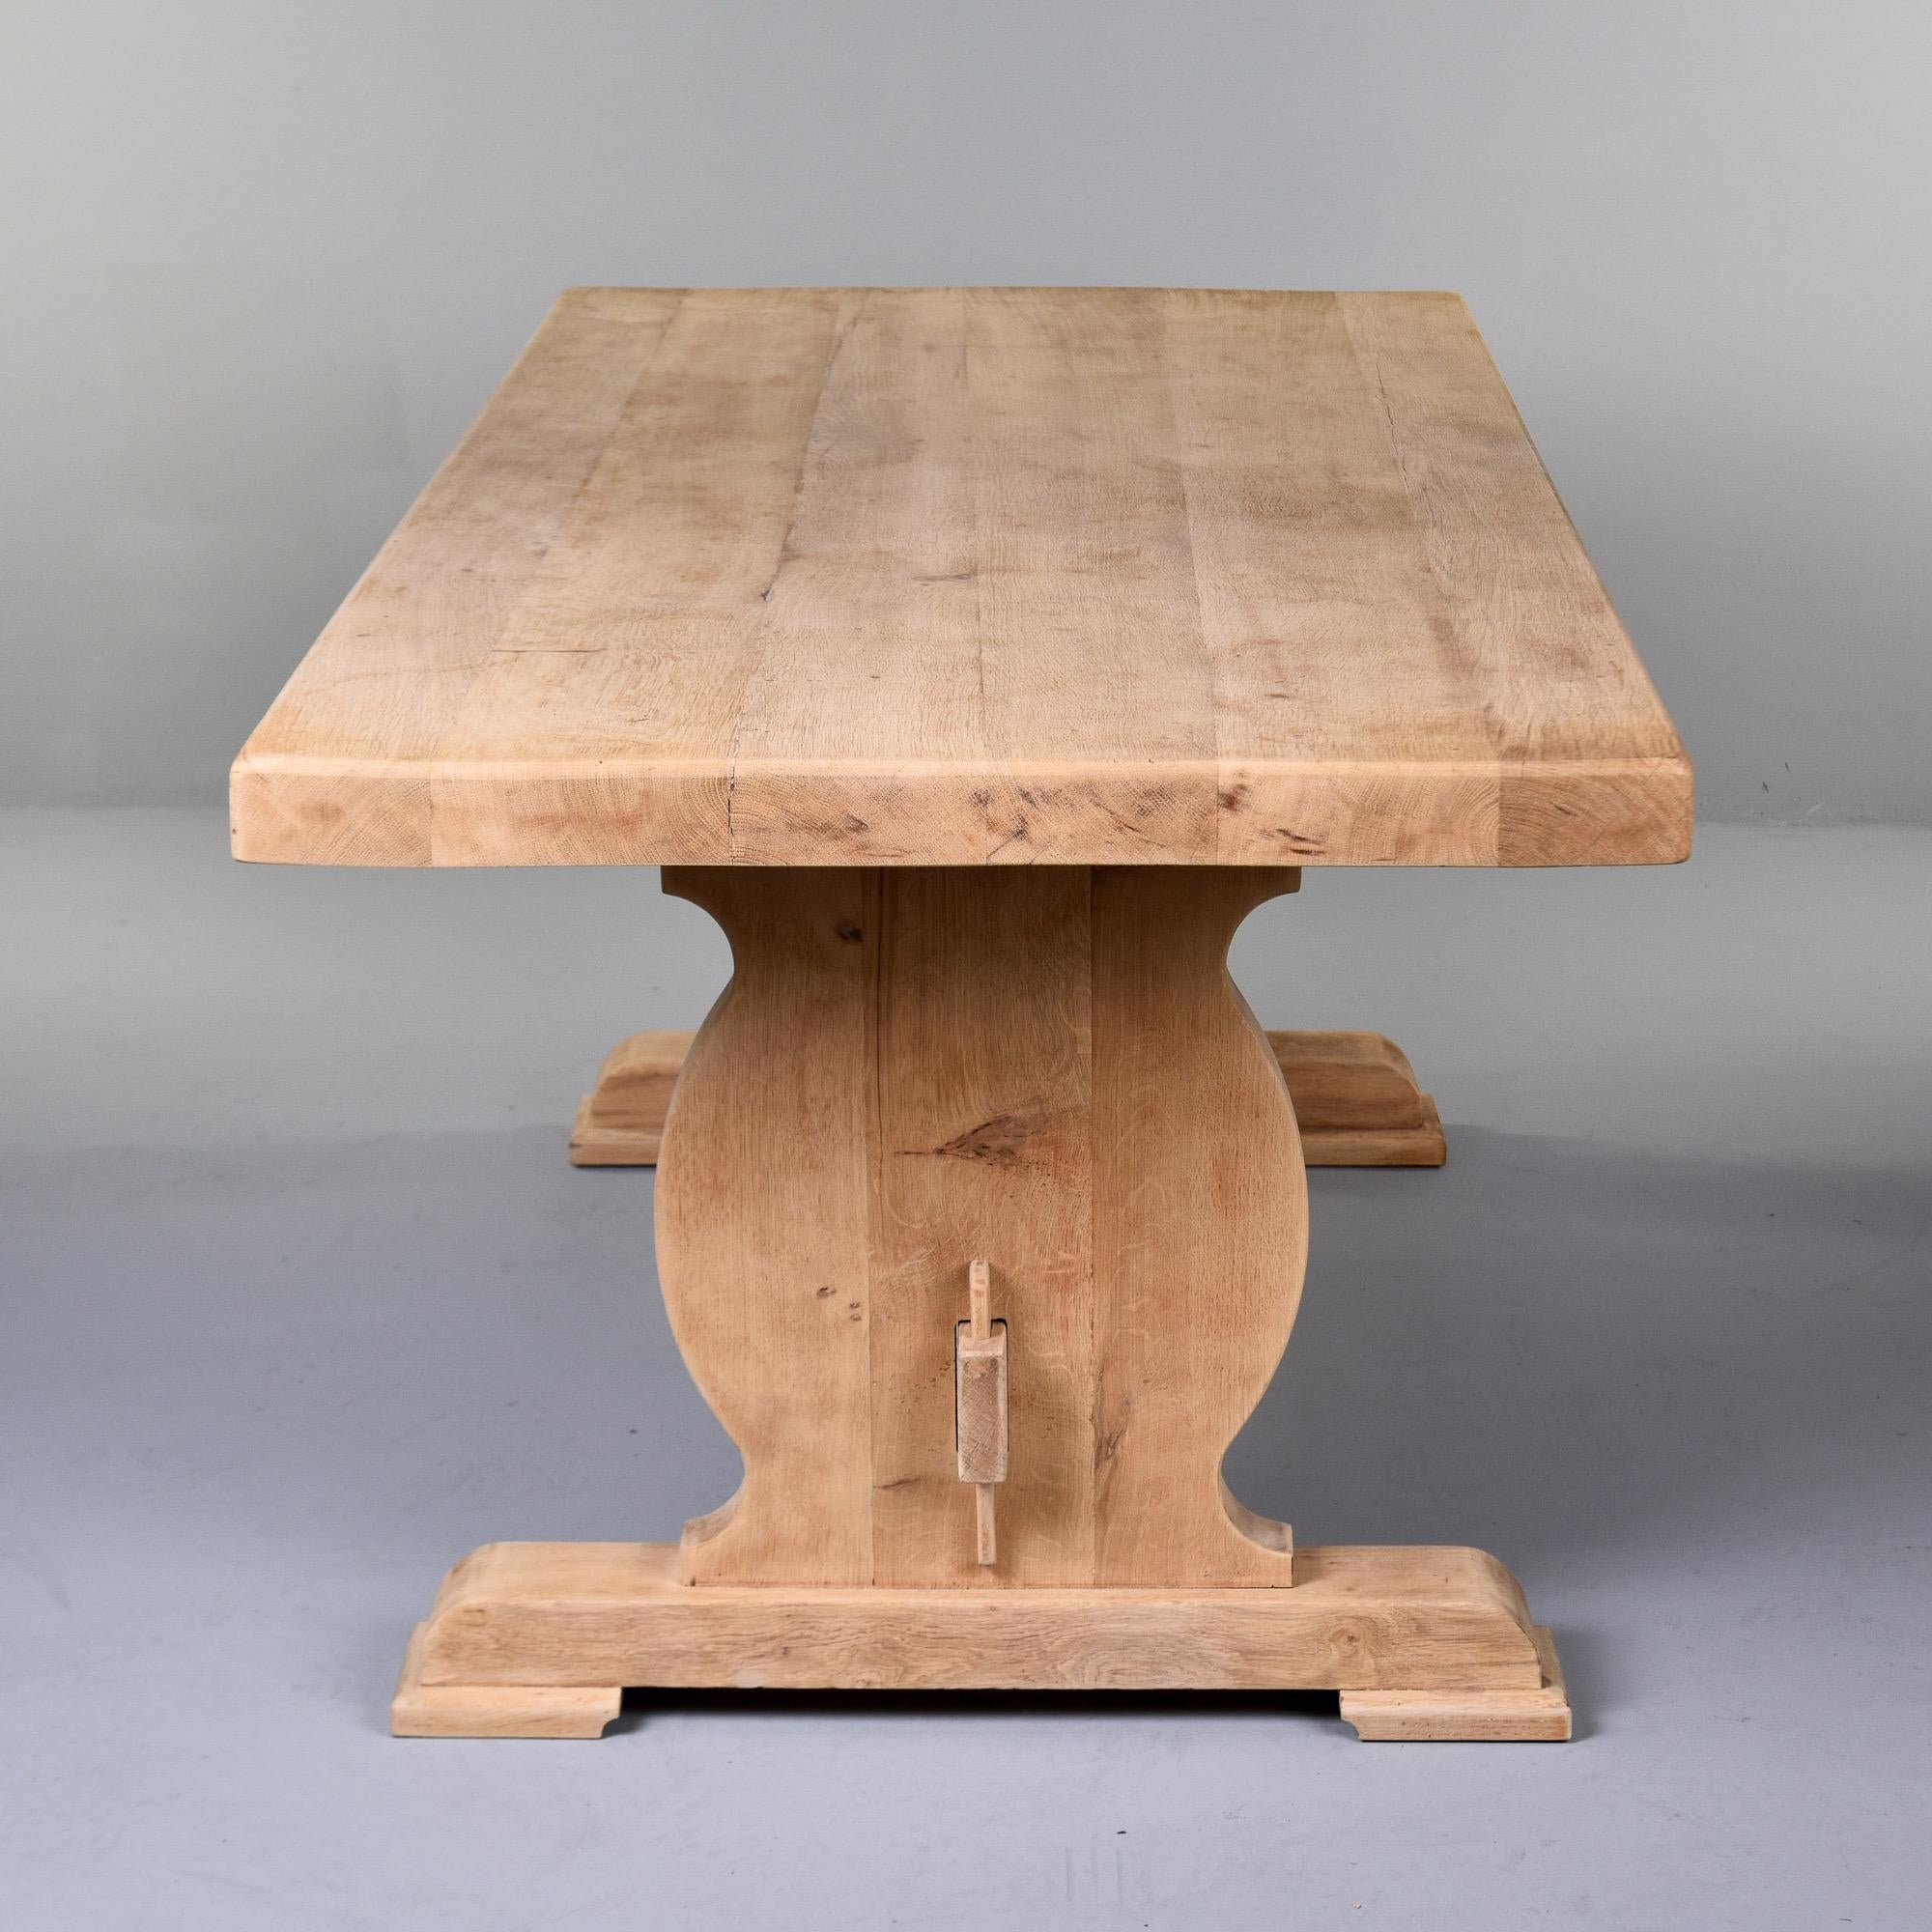 Circa 1900 Sanded Bare Oak French Country Trestle Table For Sale 2